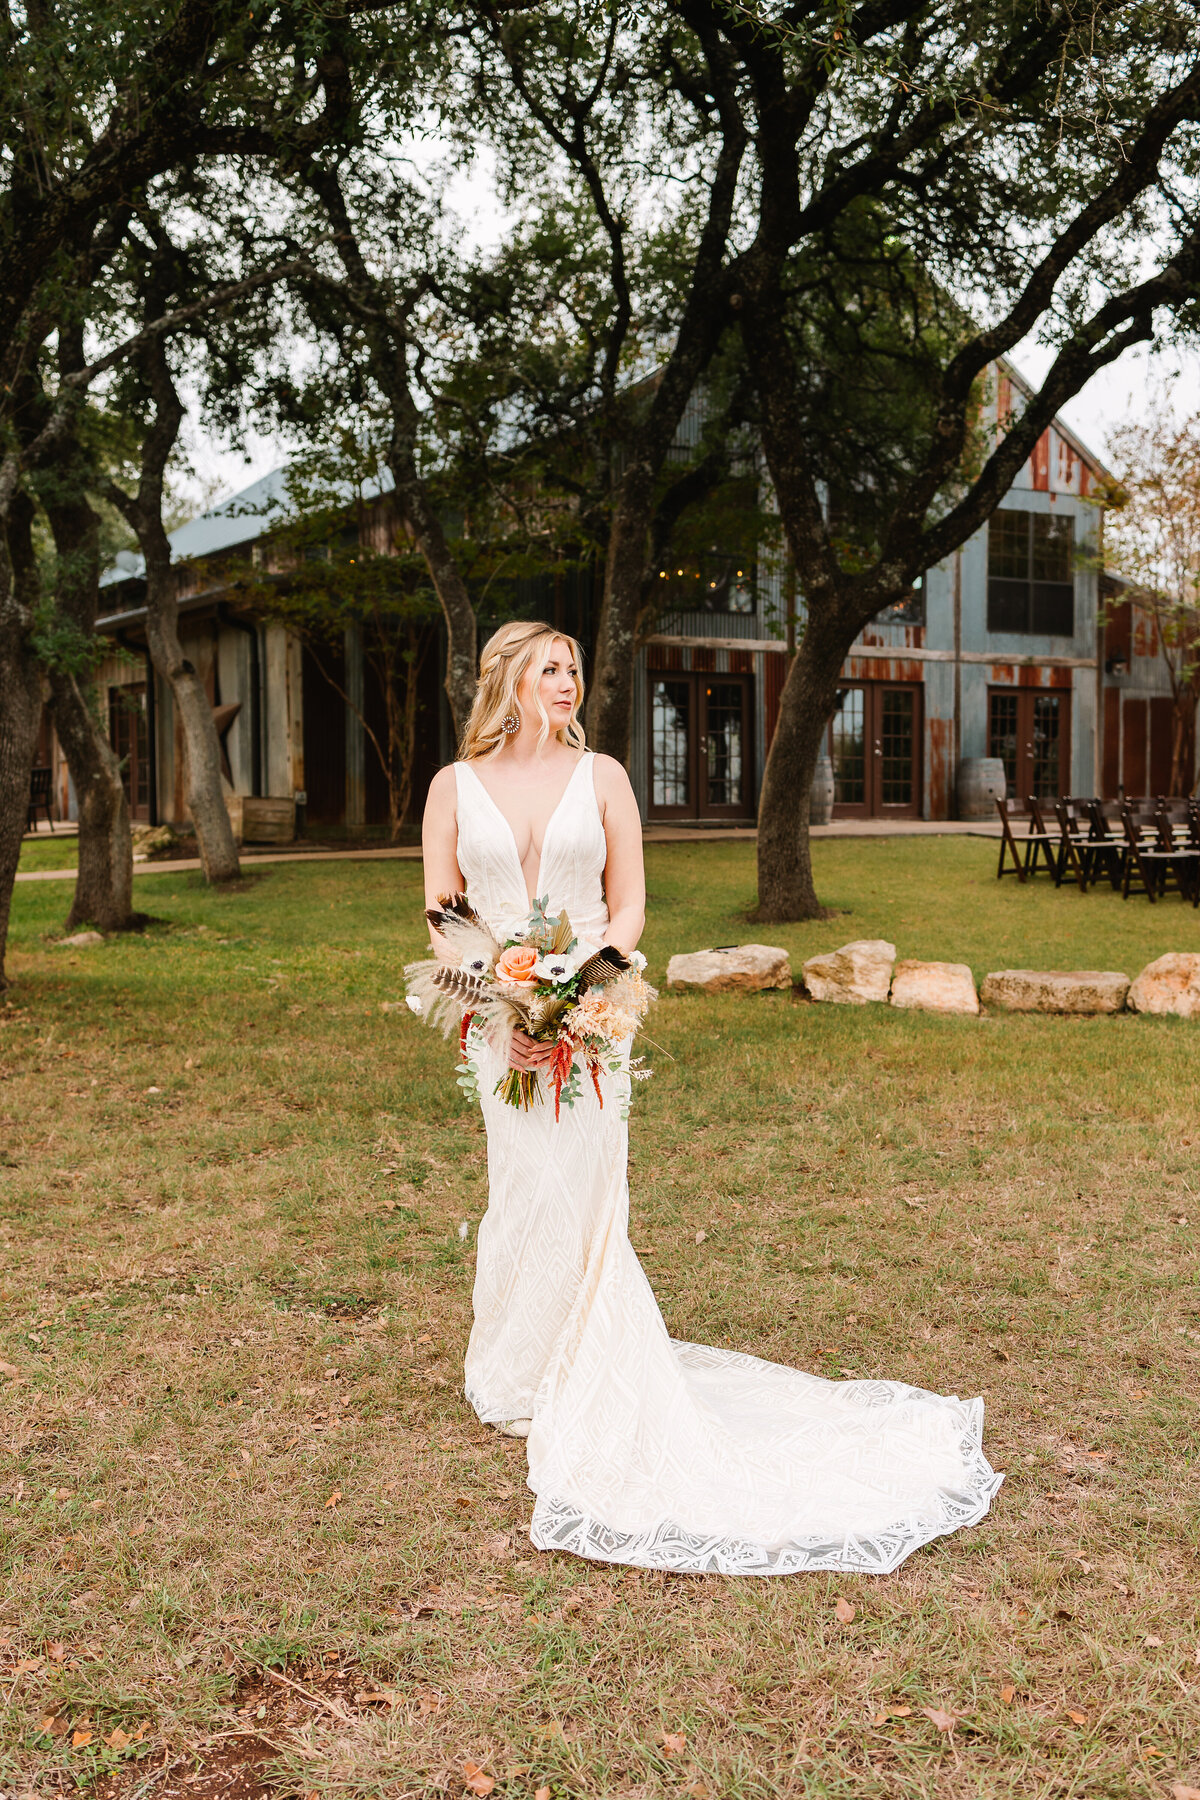 Dive into boho bliss at Vista West Ranch. A chic, untraditional party wedding in Dripping Springs, Texas, where color, texture, and epic celebrations paint your unique love story.